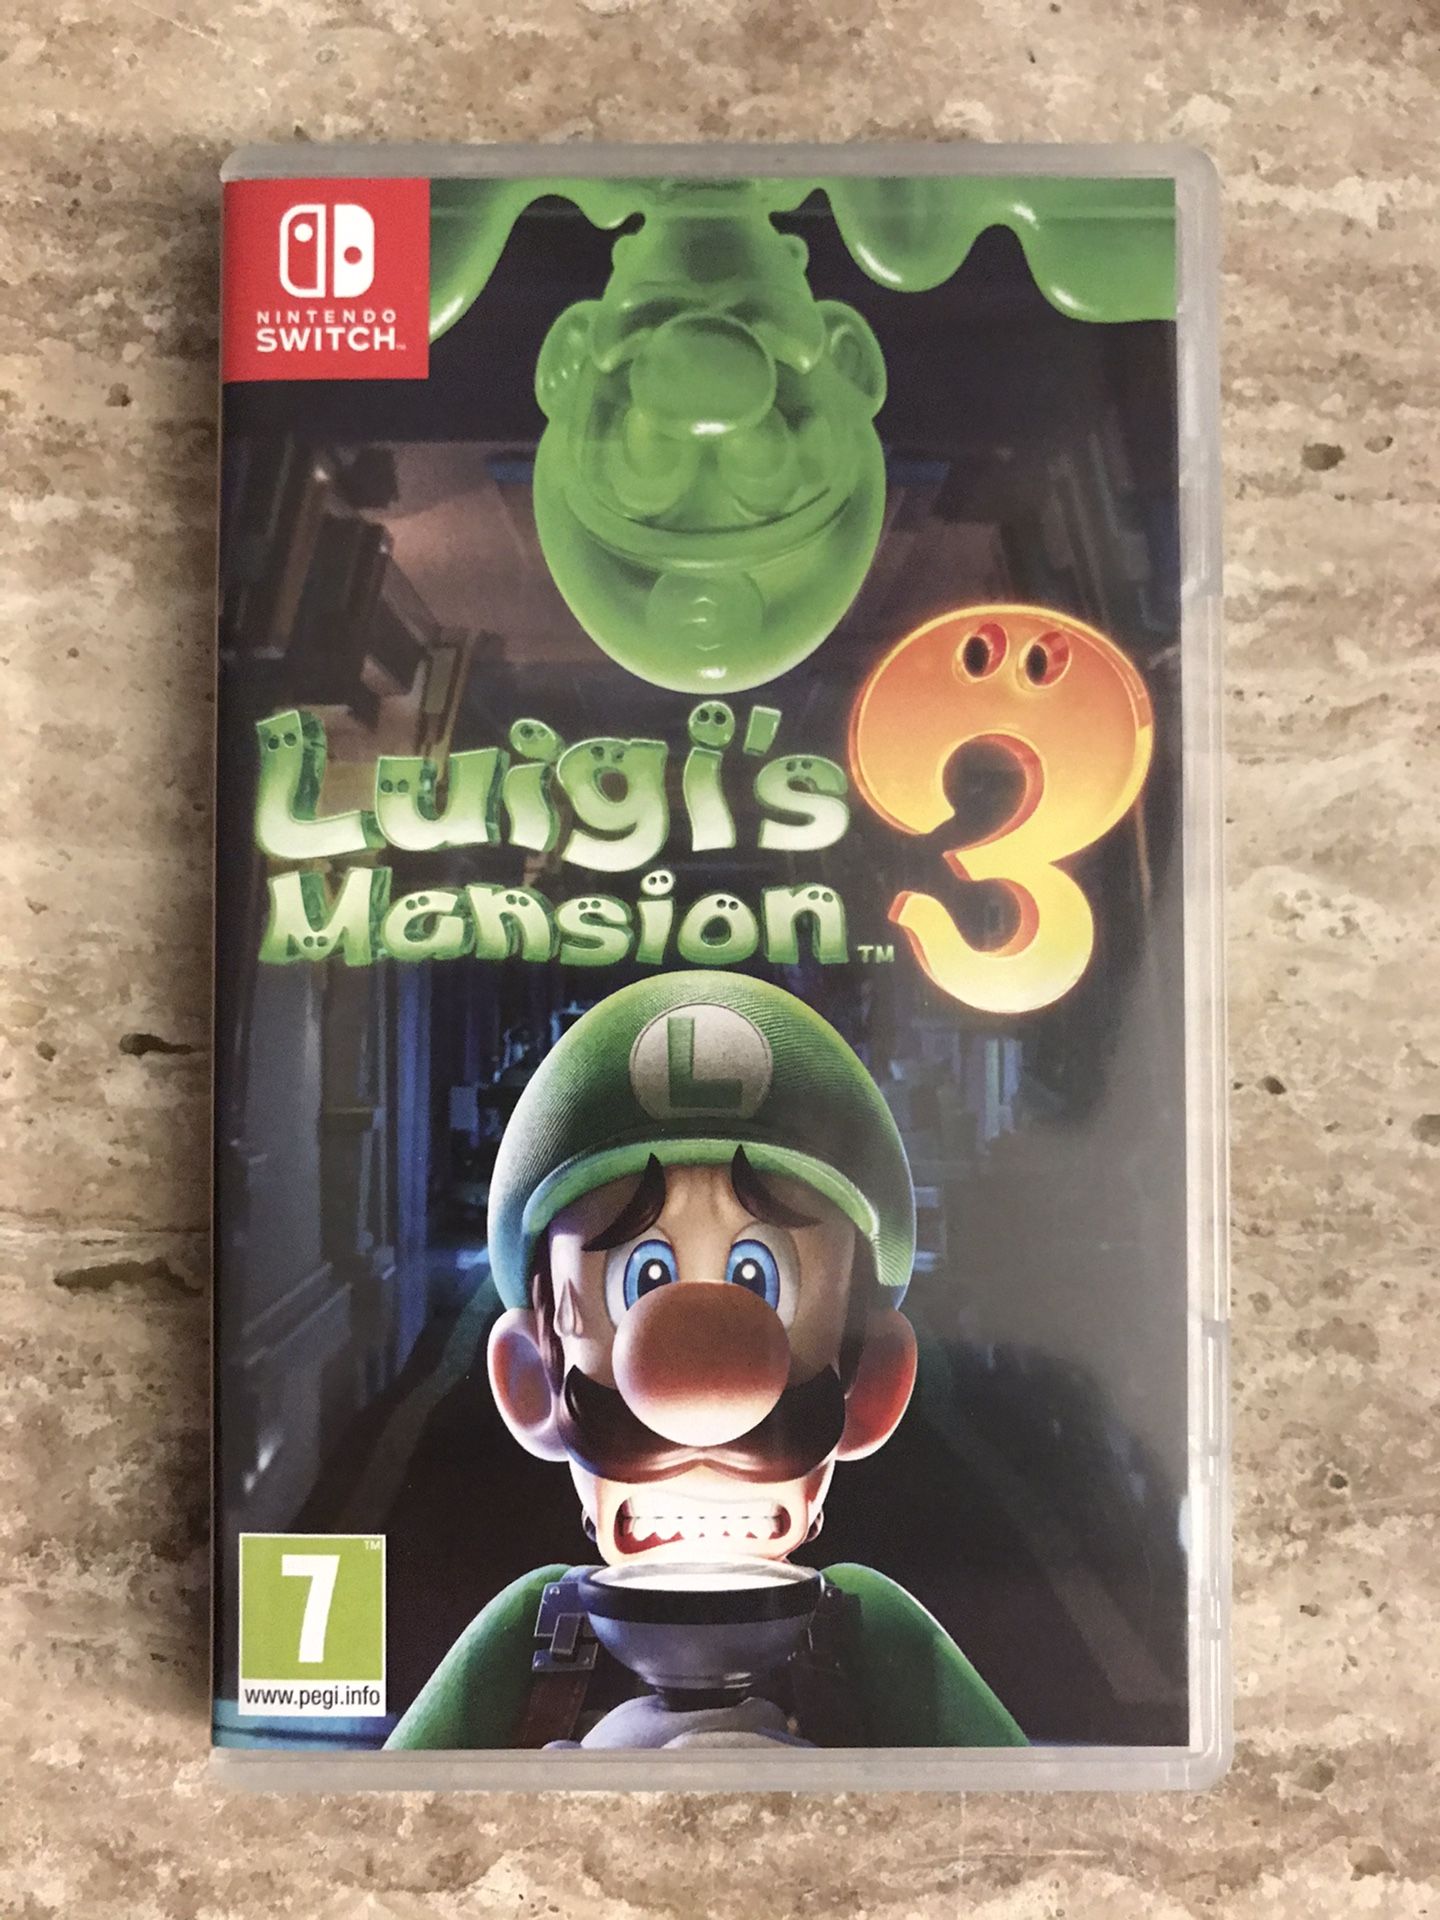 Luigis Mansion on Nintendo Switch. Great co-op